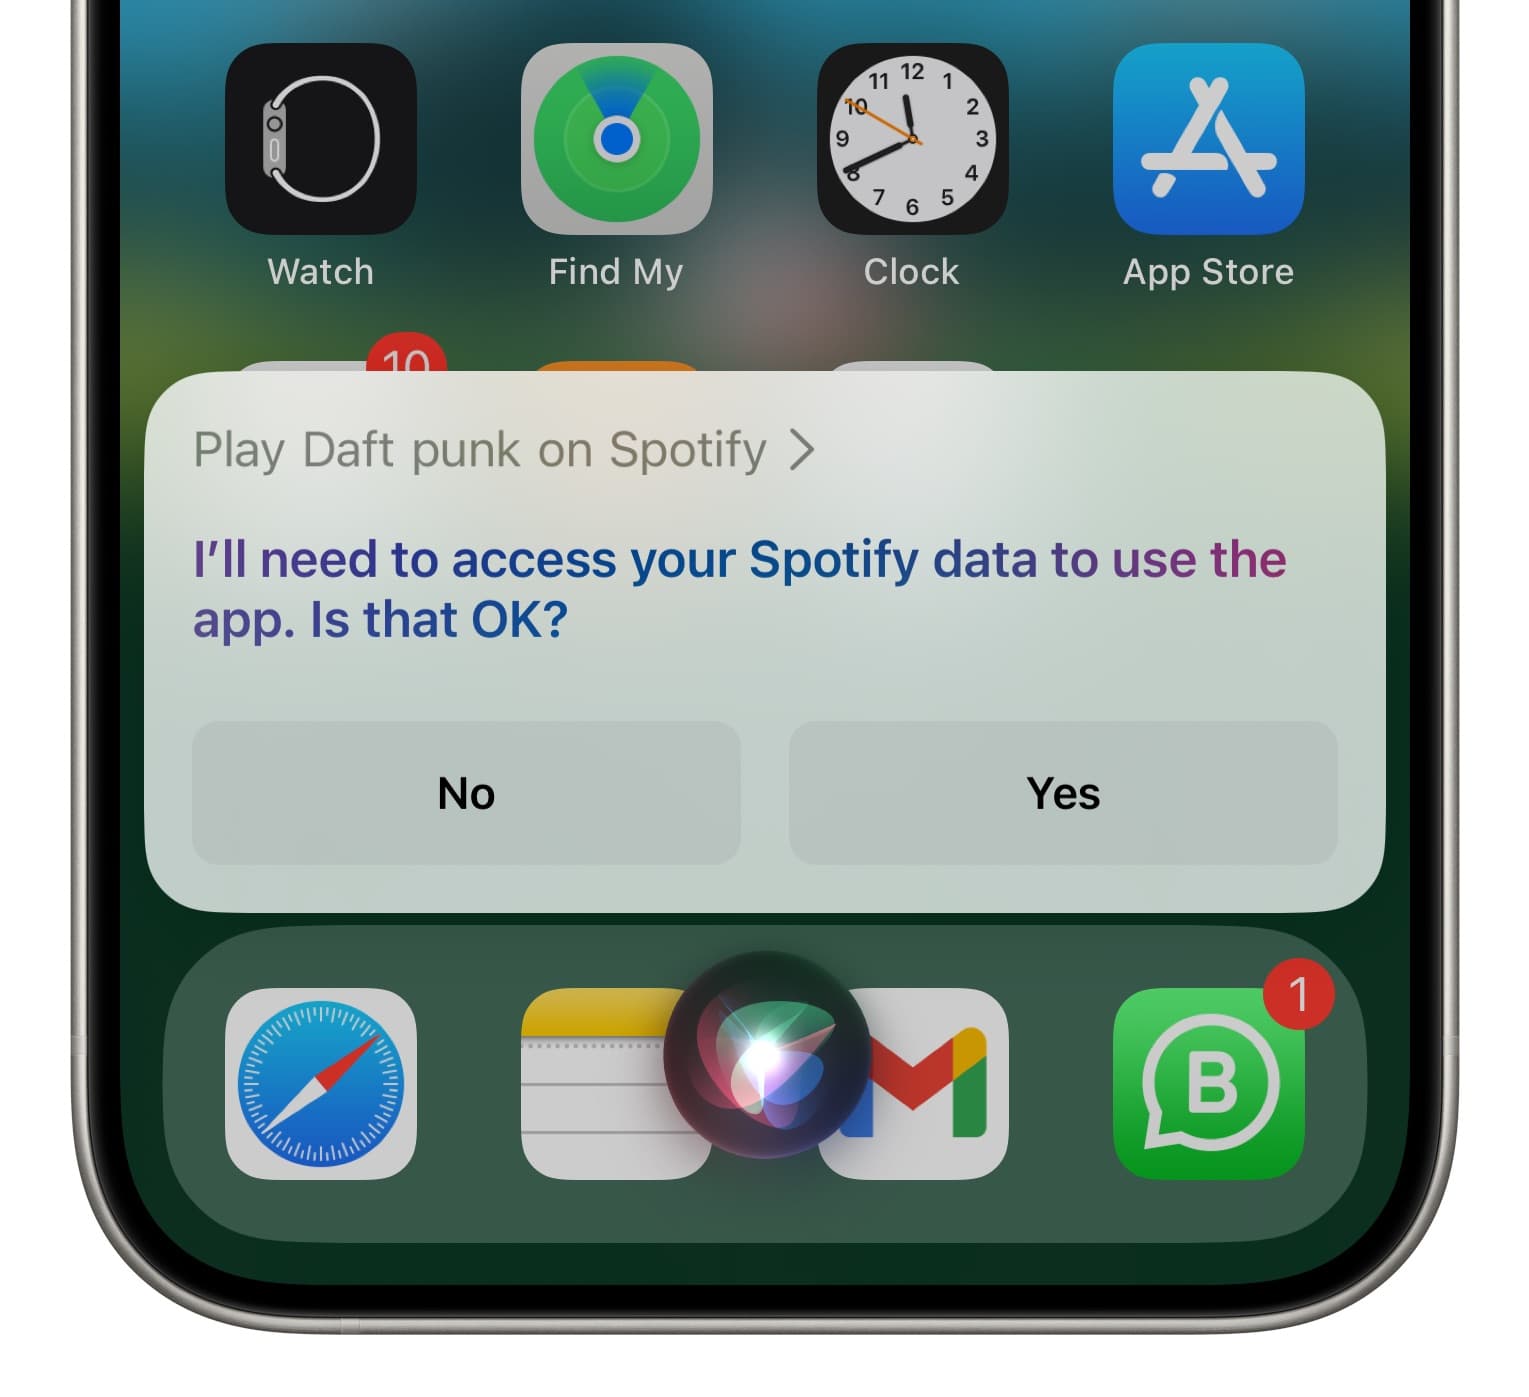 Siri asking to access Spotify app data on iPhone